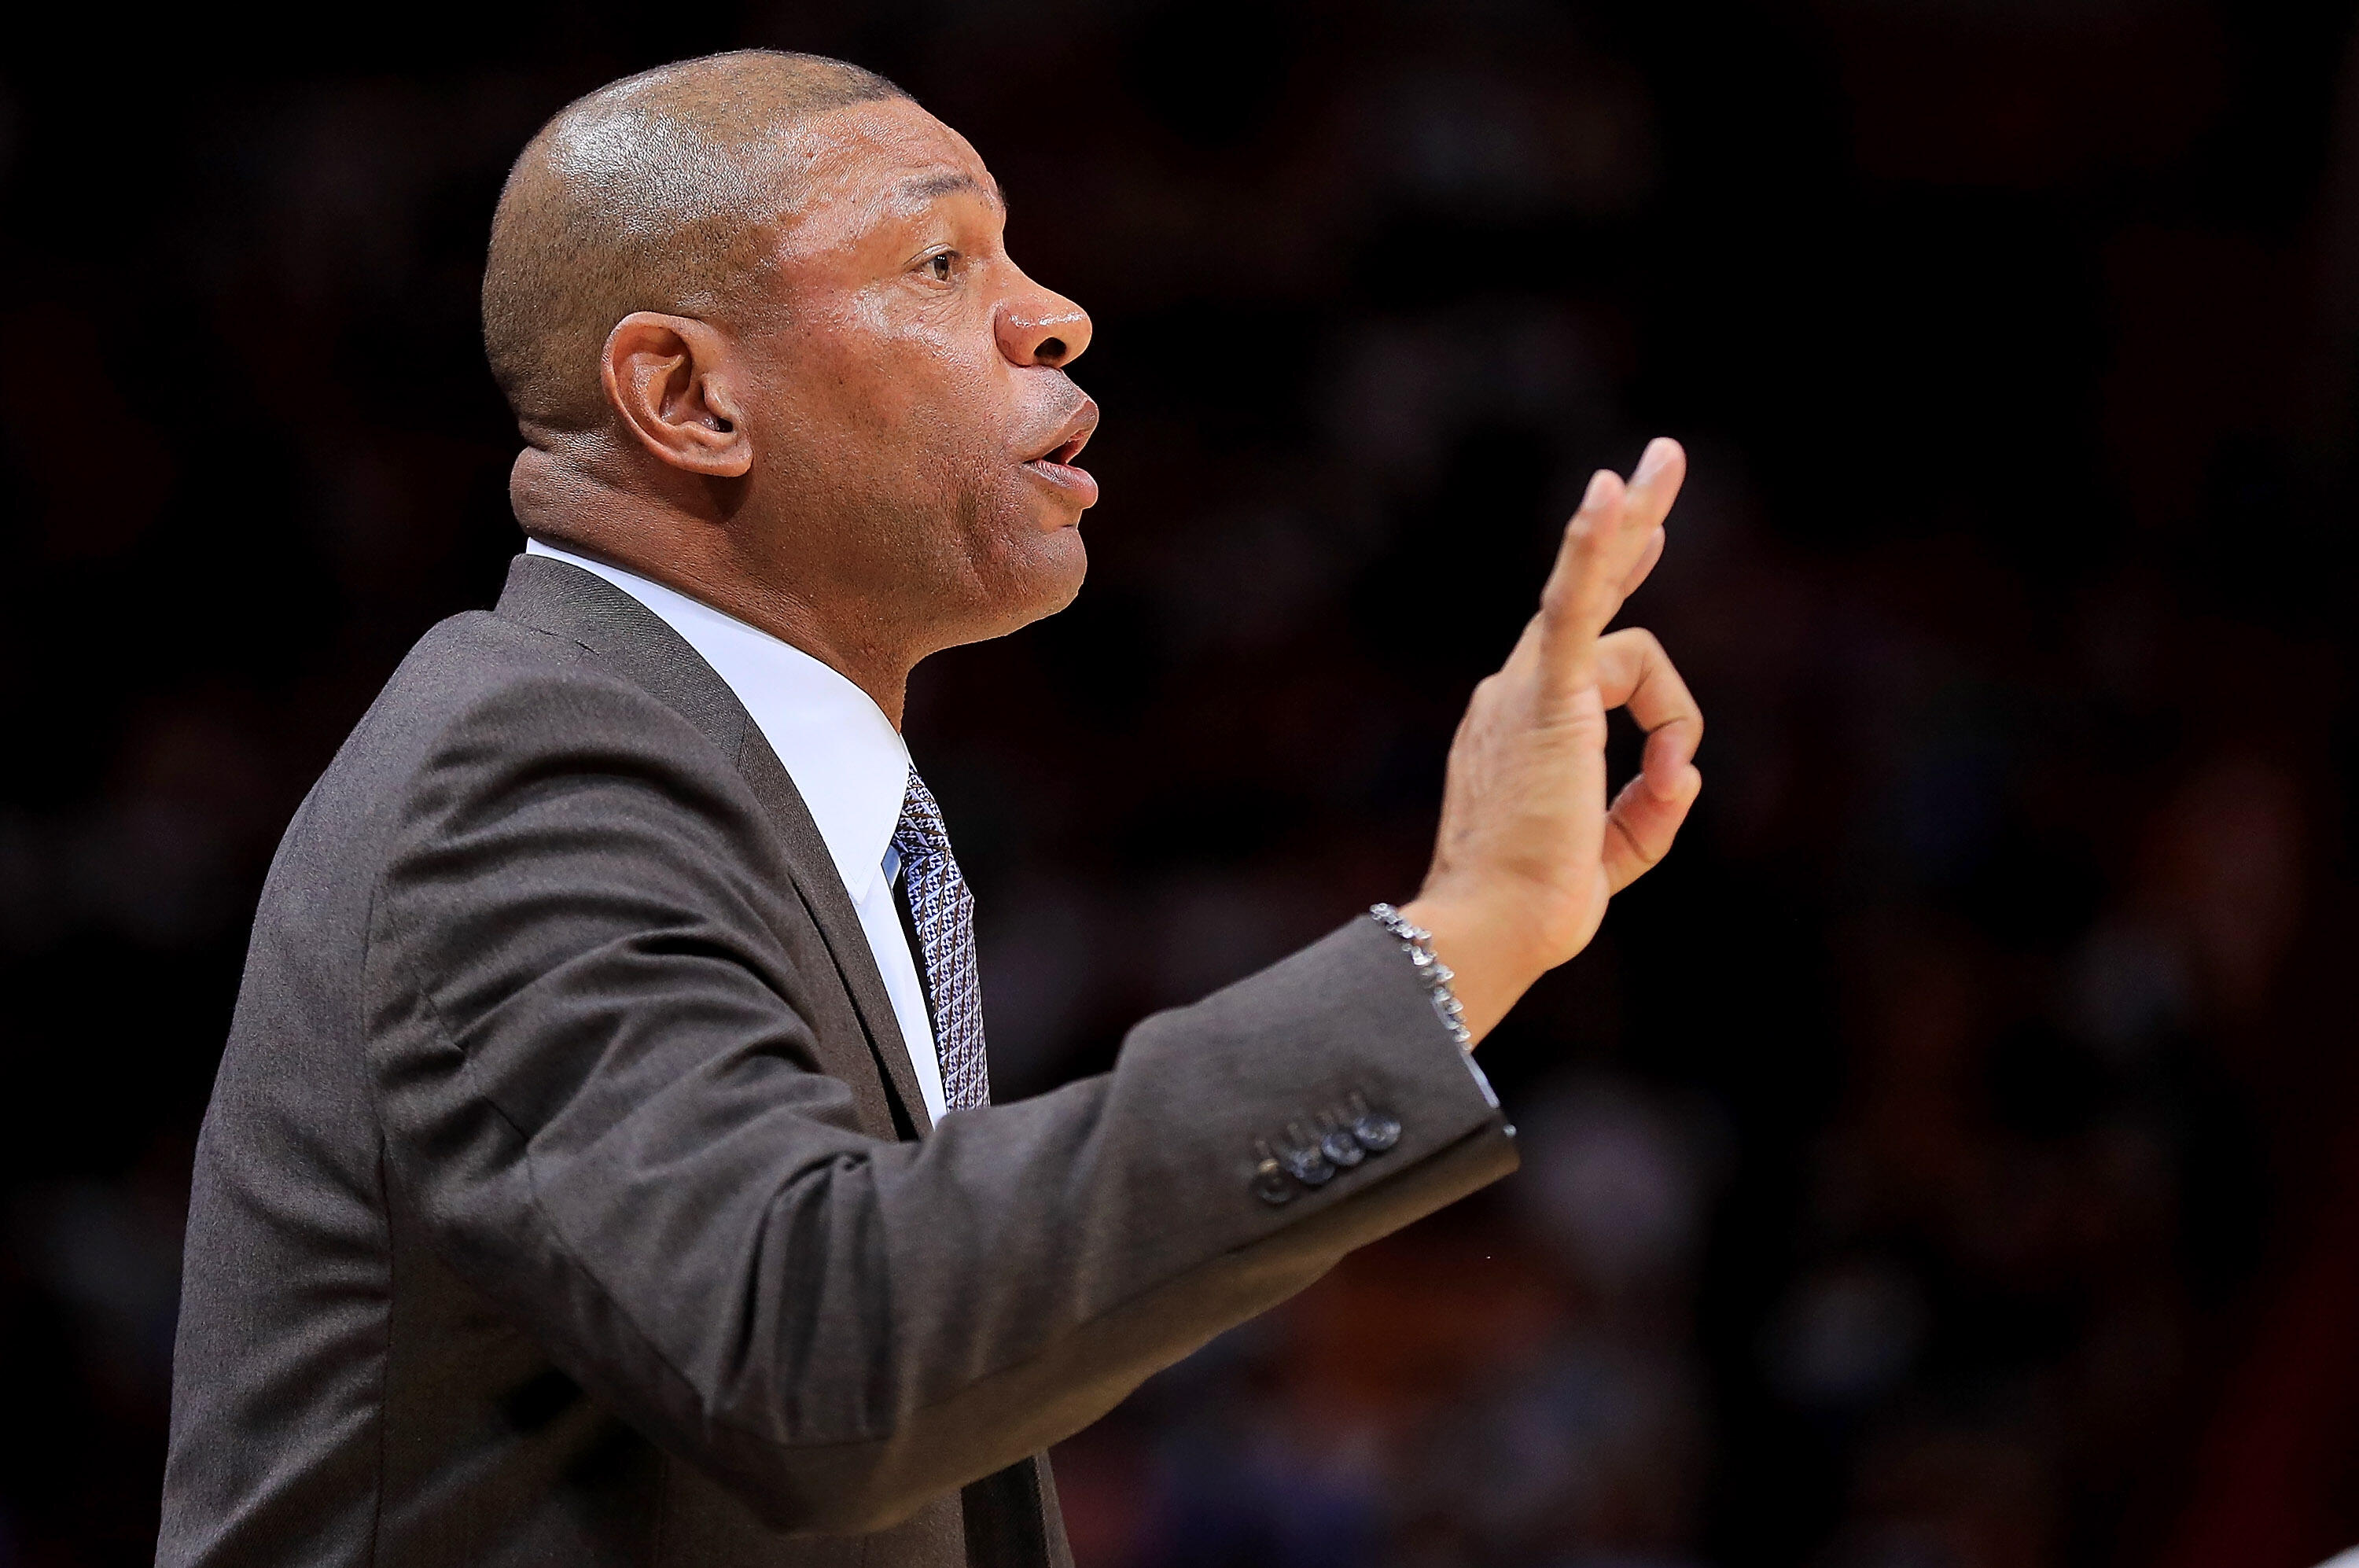 MIAMI, FL - DECEMBER 16: Head coach Doc Rivers of the LA Clippers calls a play during a game against the Miami Heat at American Airlines Arena on December 16, 2016 in Miami, Florida. NOTE TO USER: User expressly acknowledges and agrees that, by downloadin